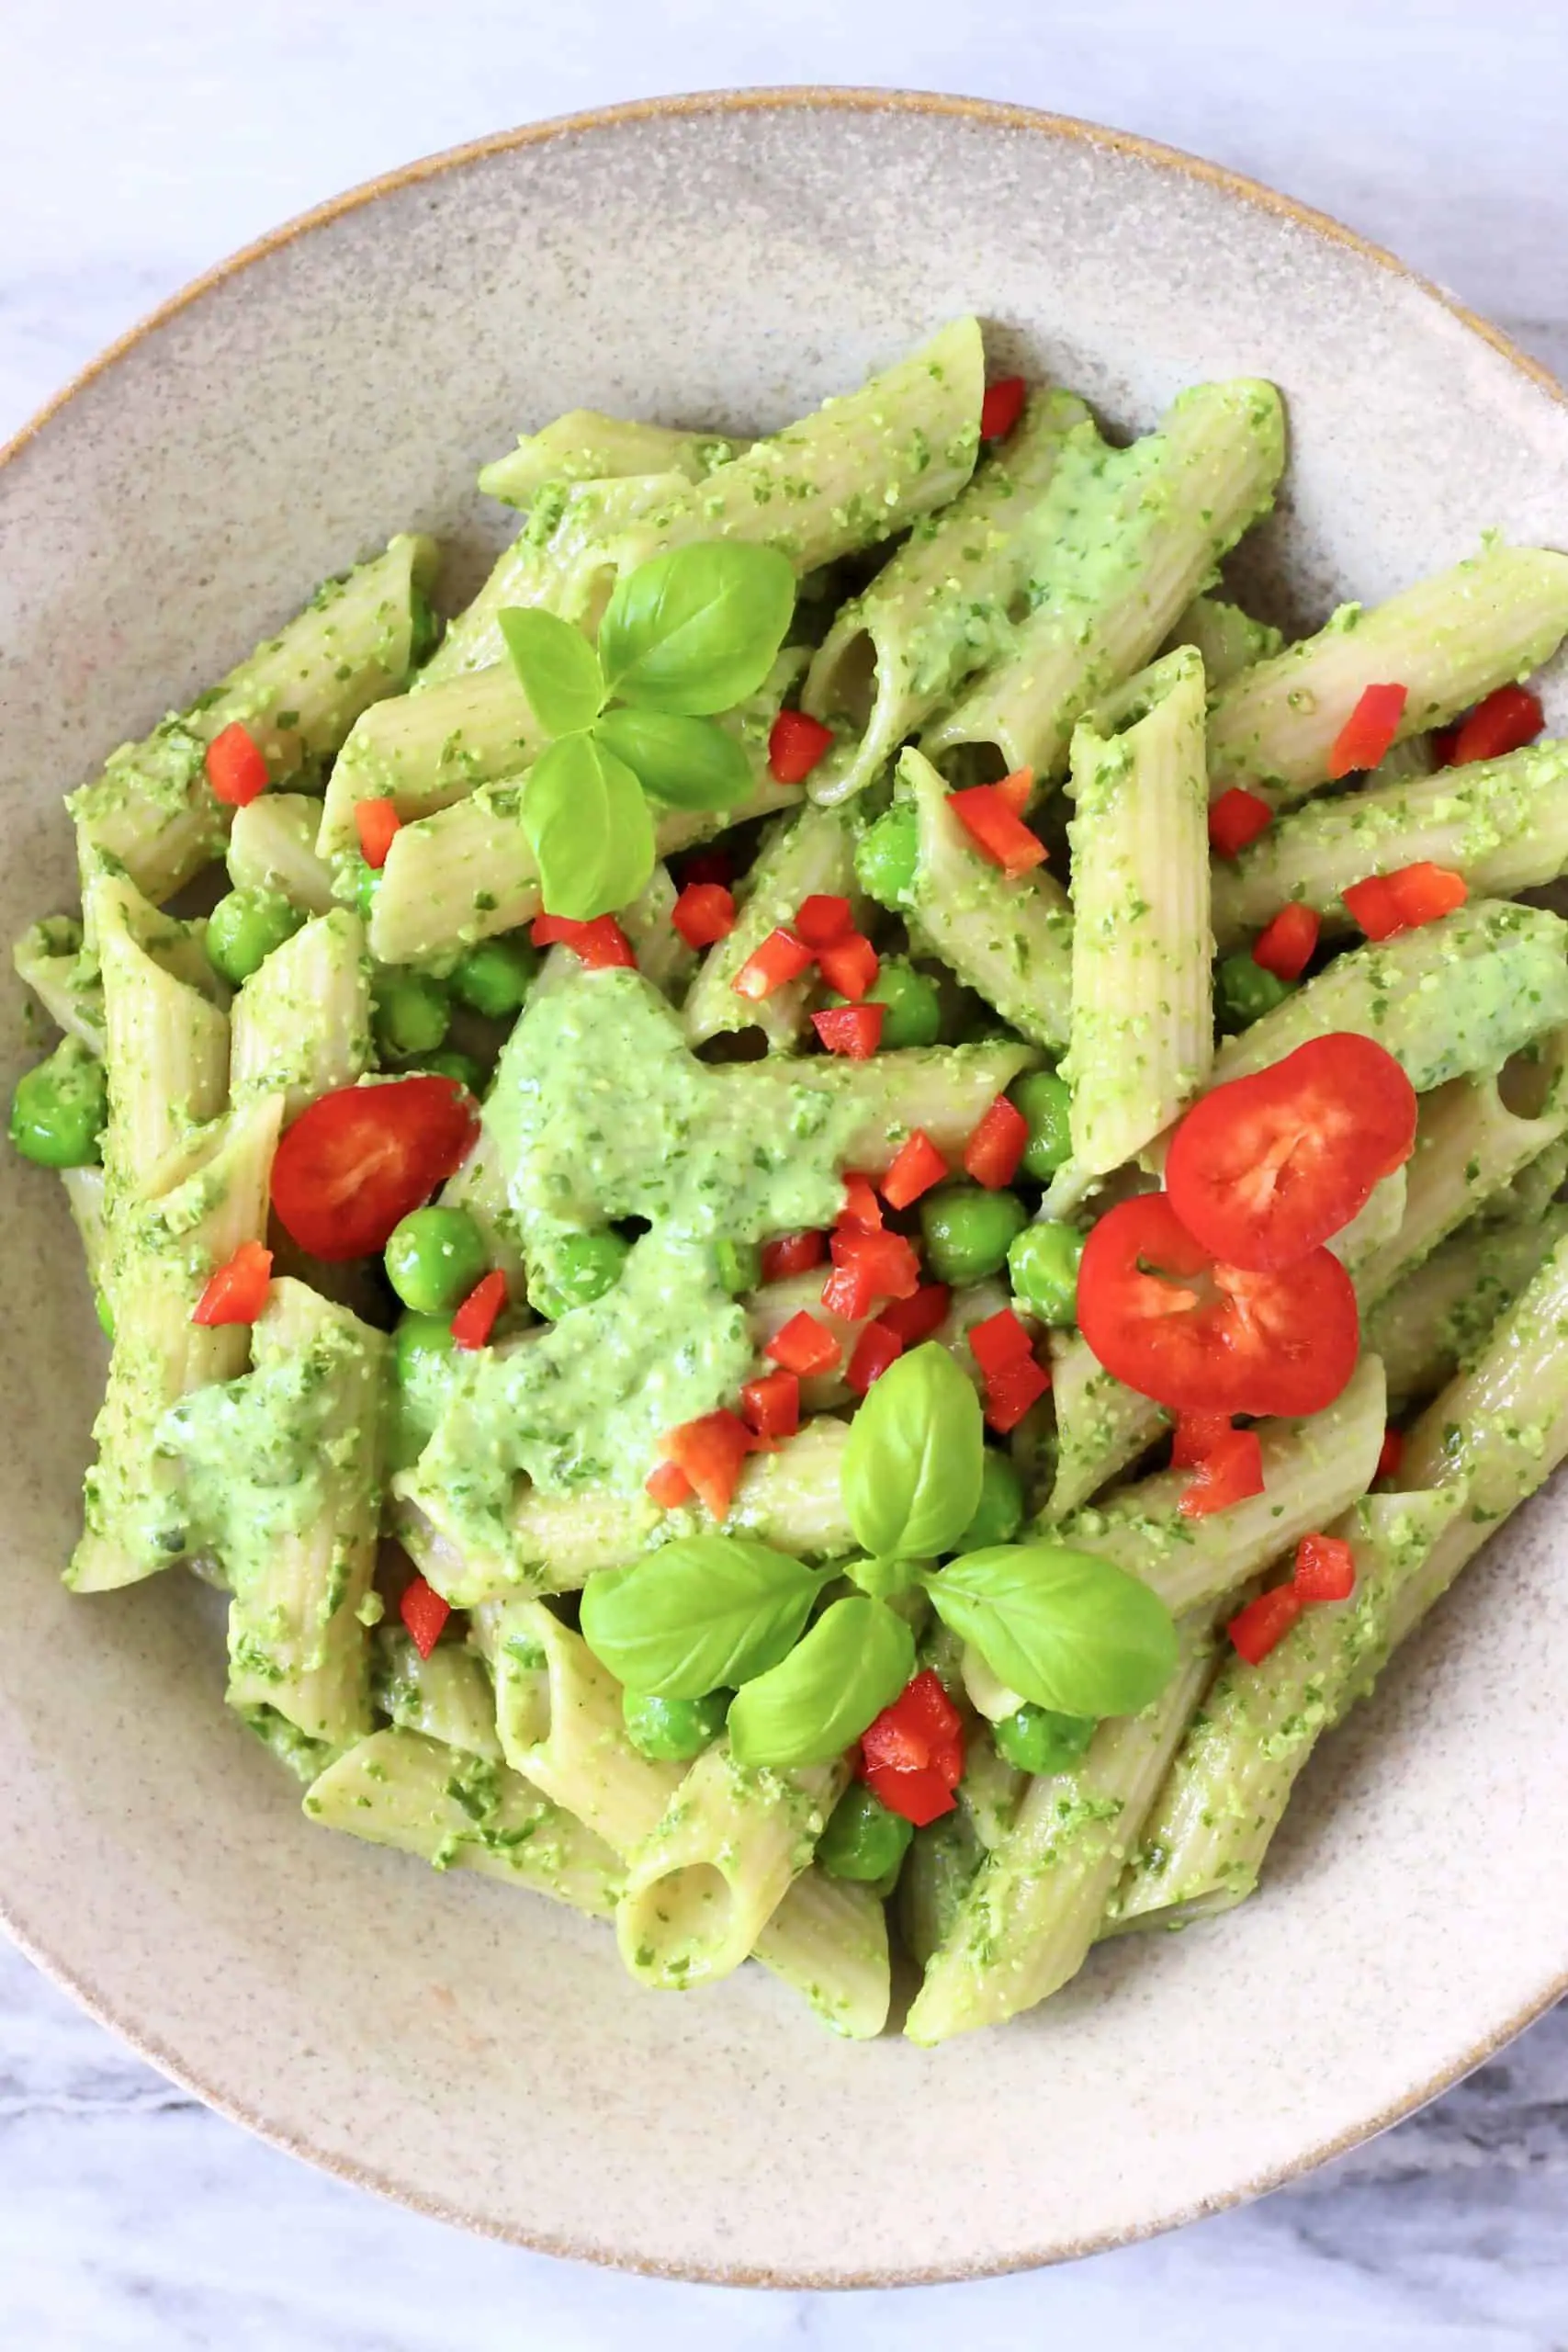 Penne pasta with pesto sauce, green peas and chopped red pepper in a beige bowl 